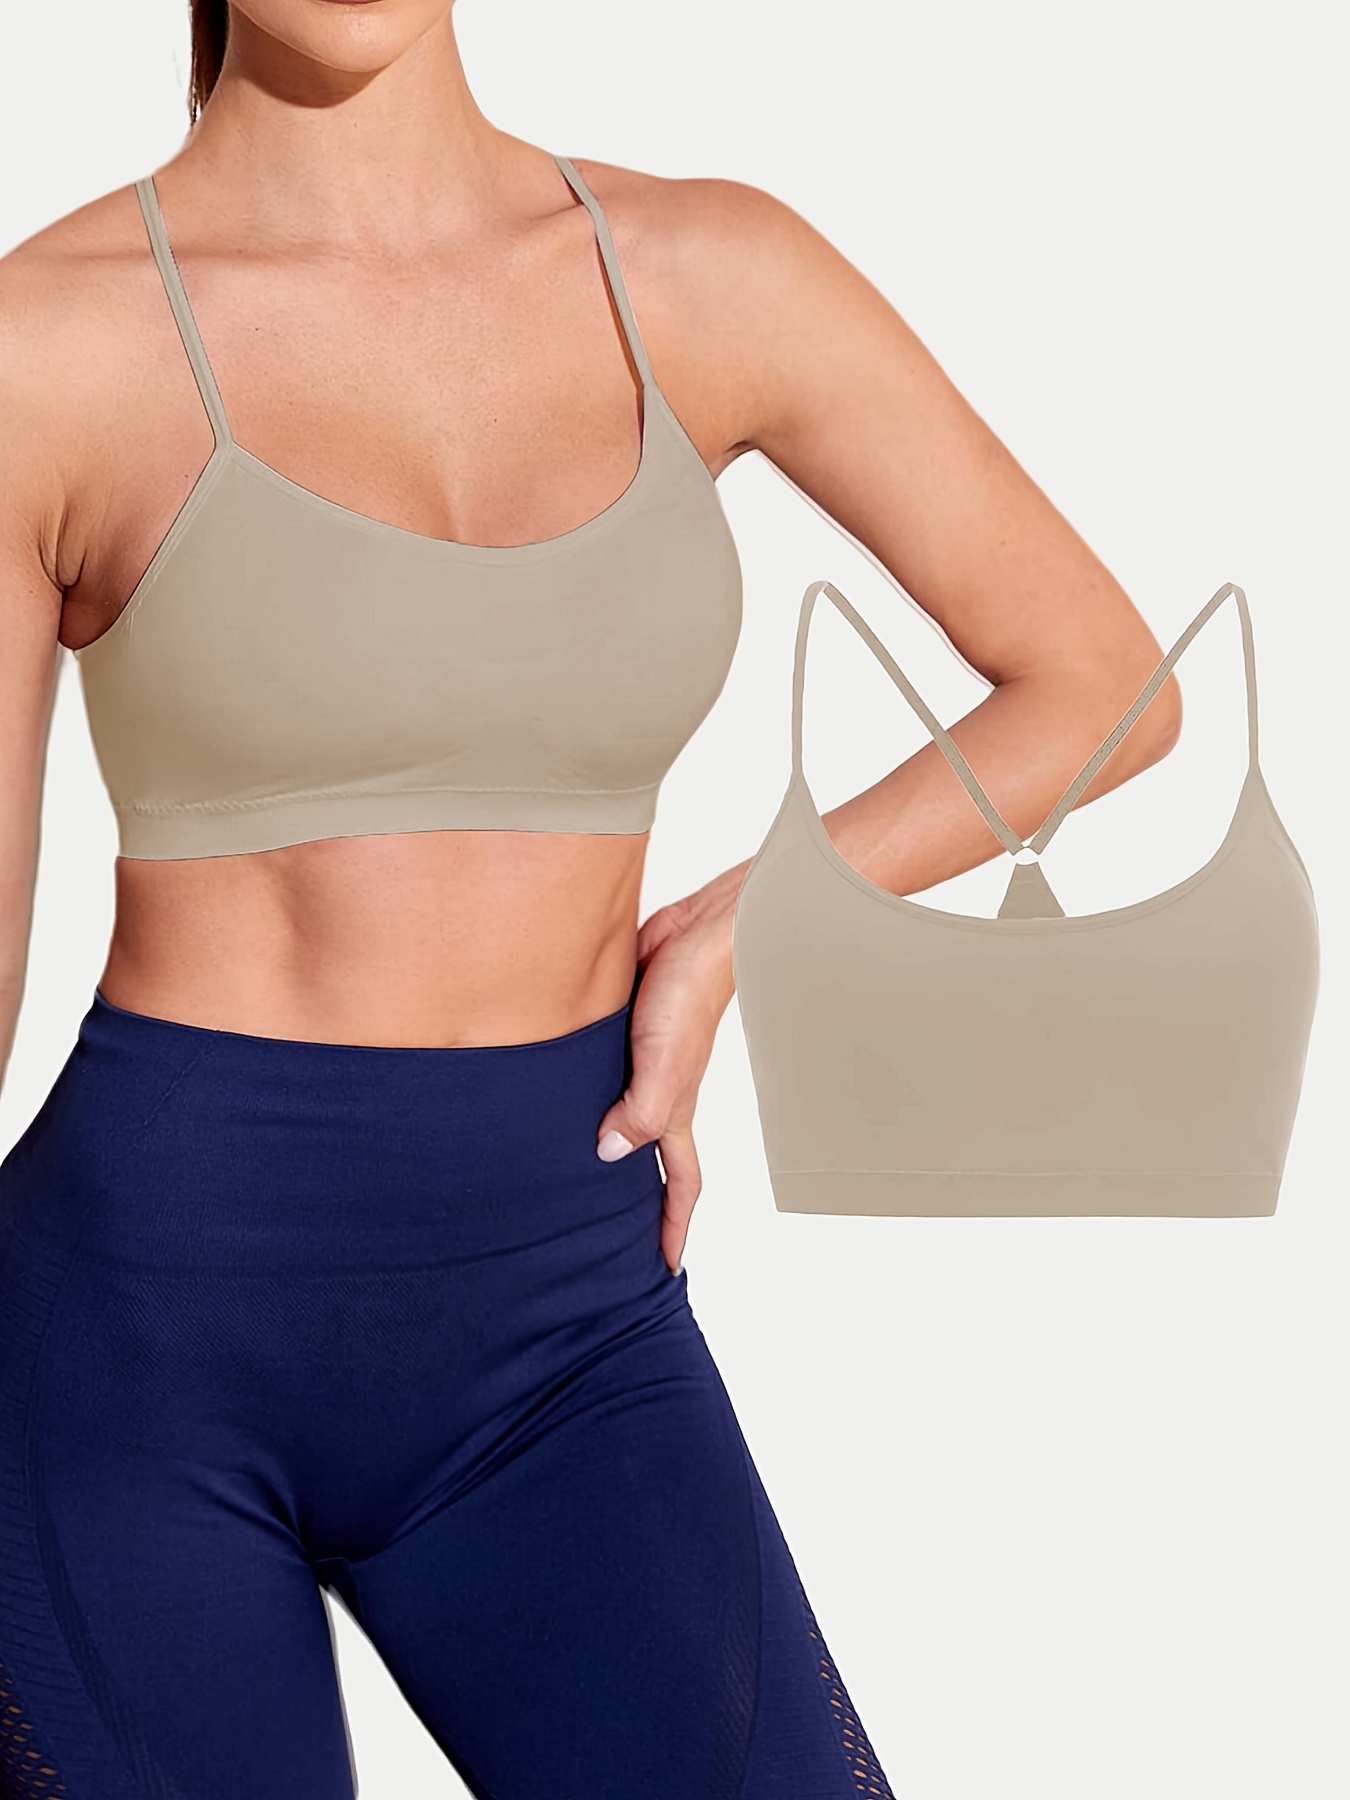 Women's Fixed Shoulder Yoga Bras Seamless No-Underwire Stretch Padded  Support Longline Workout Tank Top Cross Back Fitness Running Sports Bras